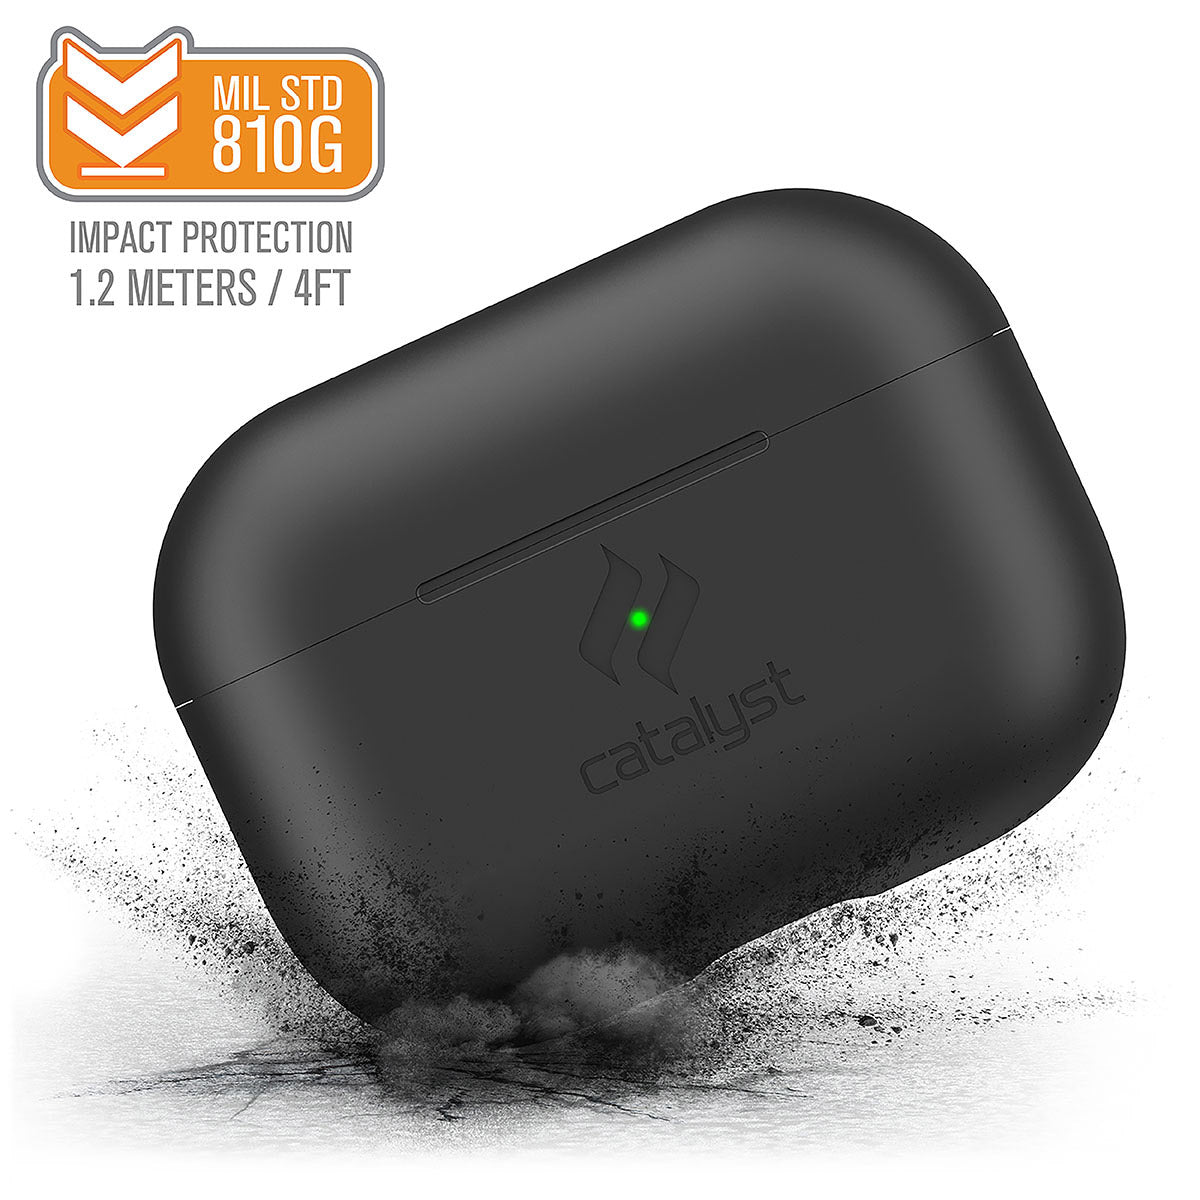 Catalyst airpods pro gen 2/1 slim case showing how drop proof the case is in a stealth black text reads MIL STD 810G impact protection 1.2 meters/4FT